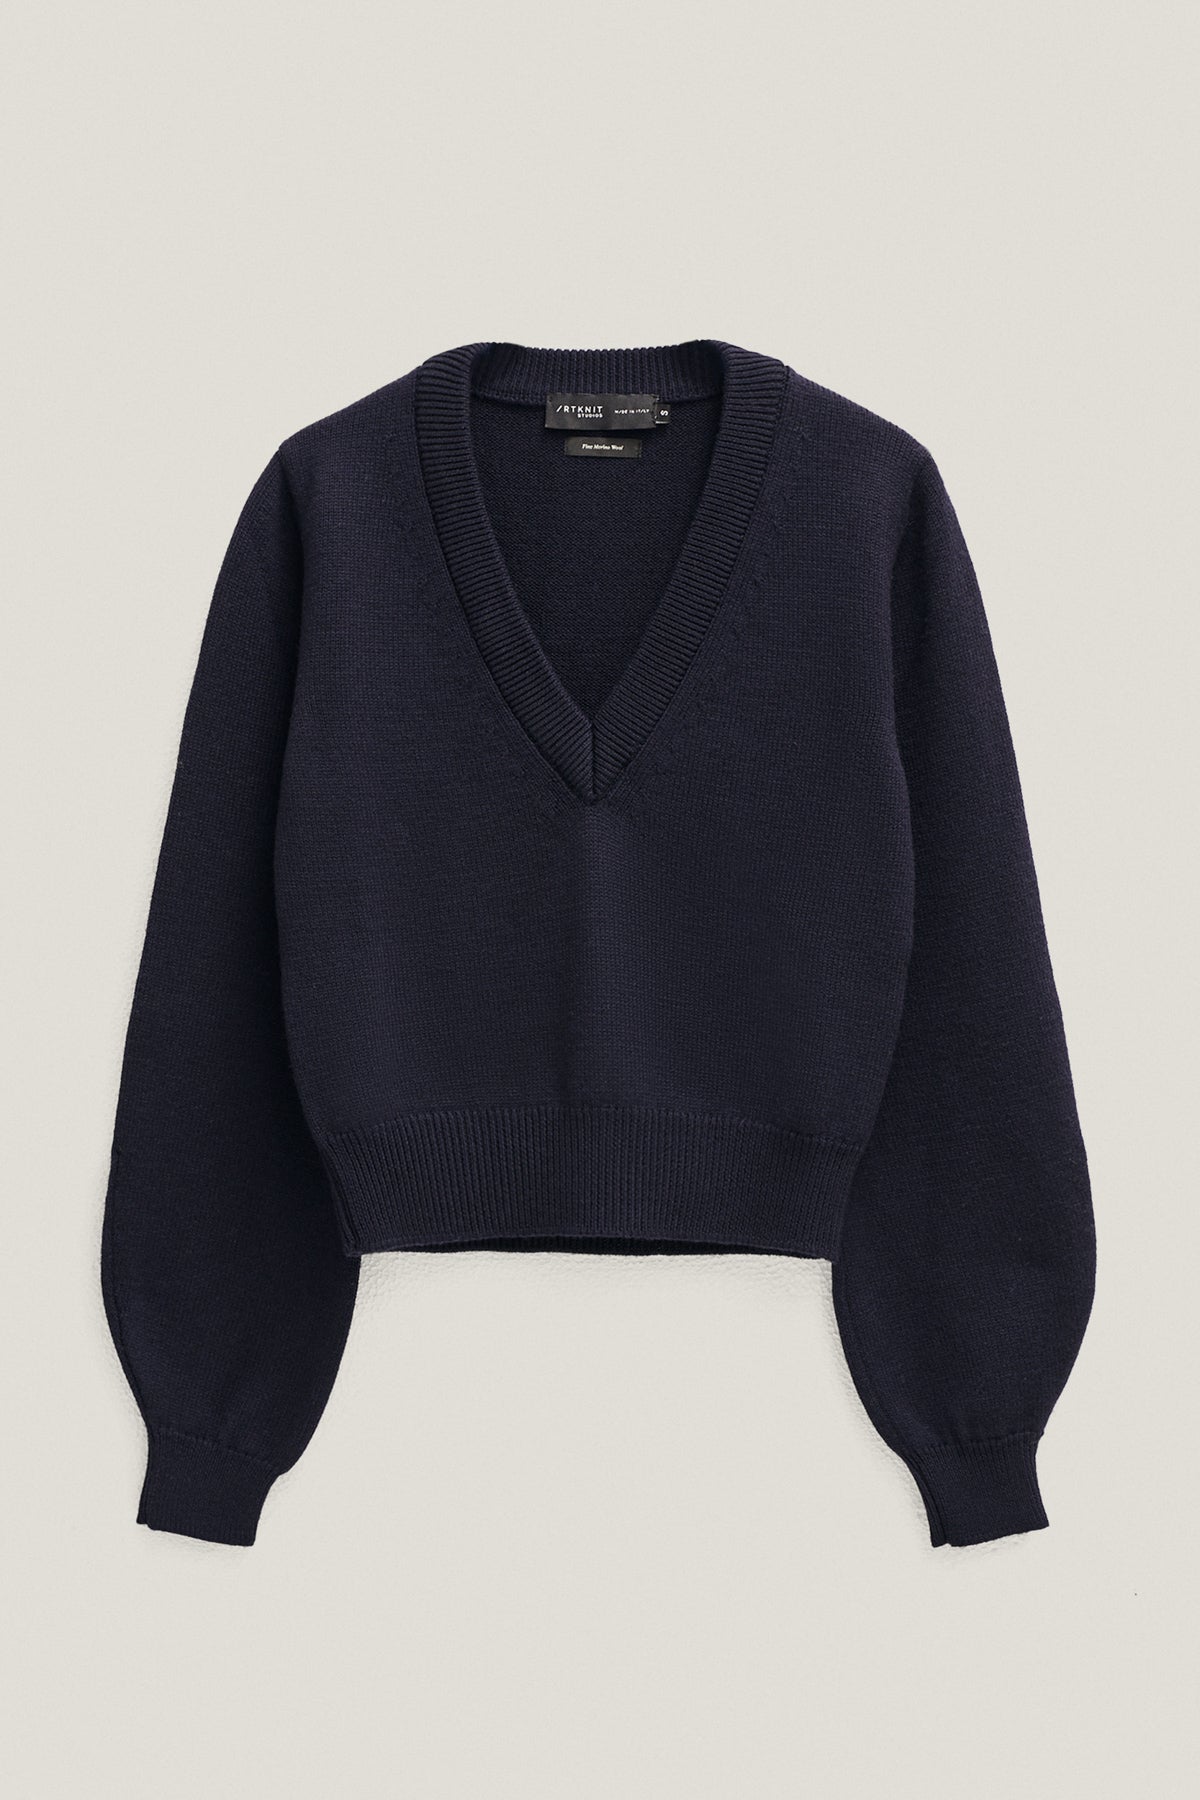 Blue Navy | The Cropped V-neck Sweater